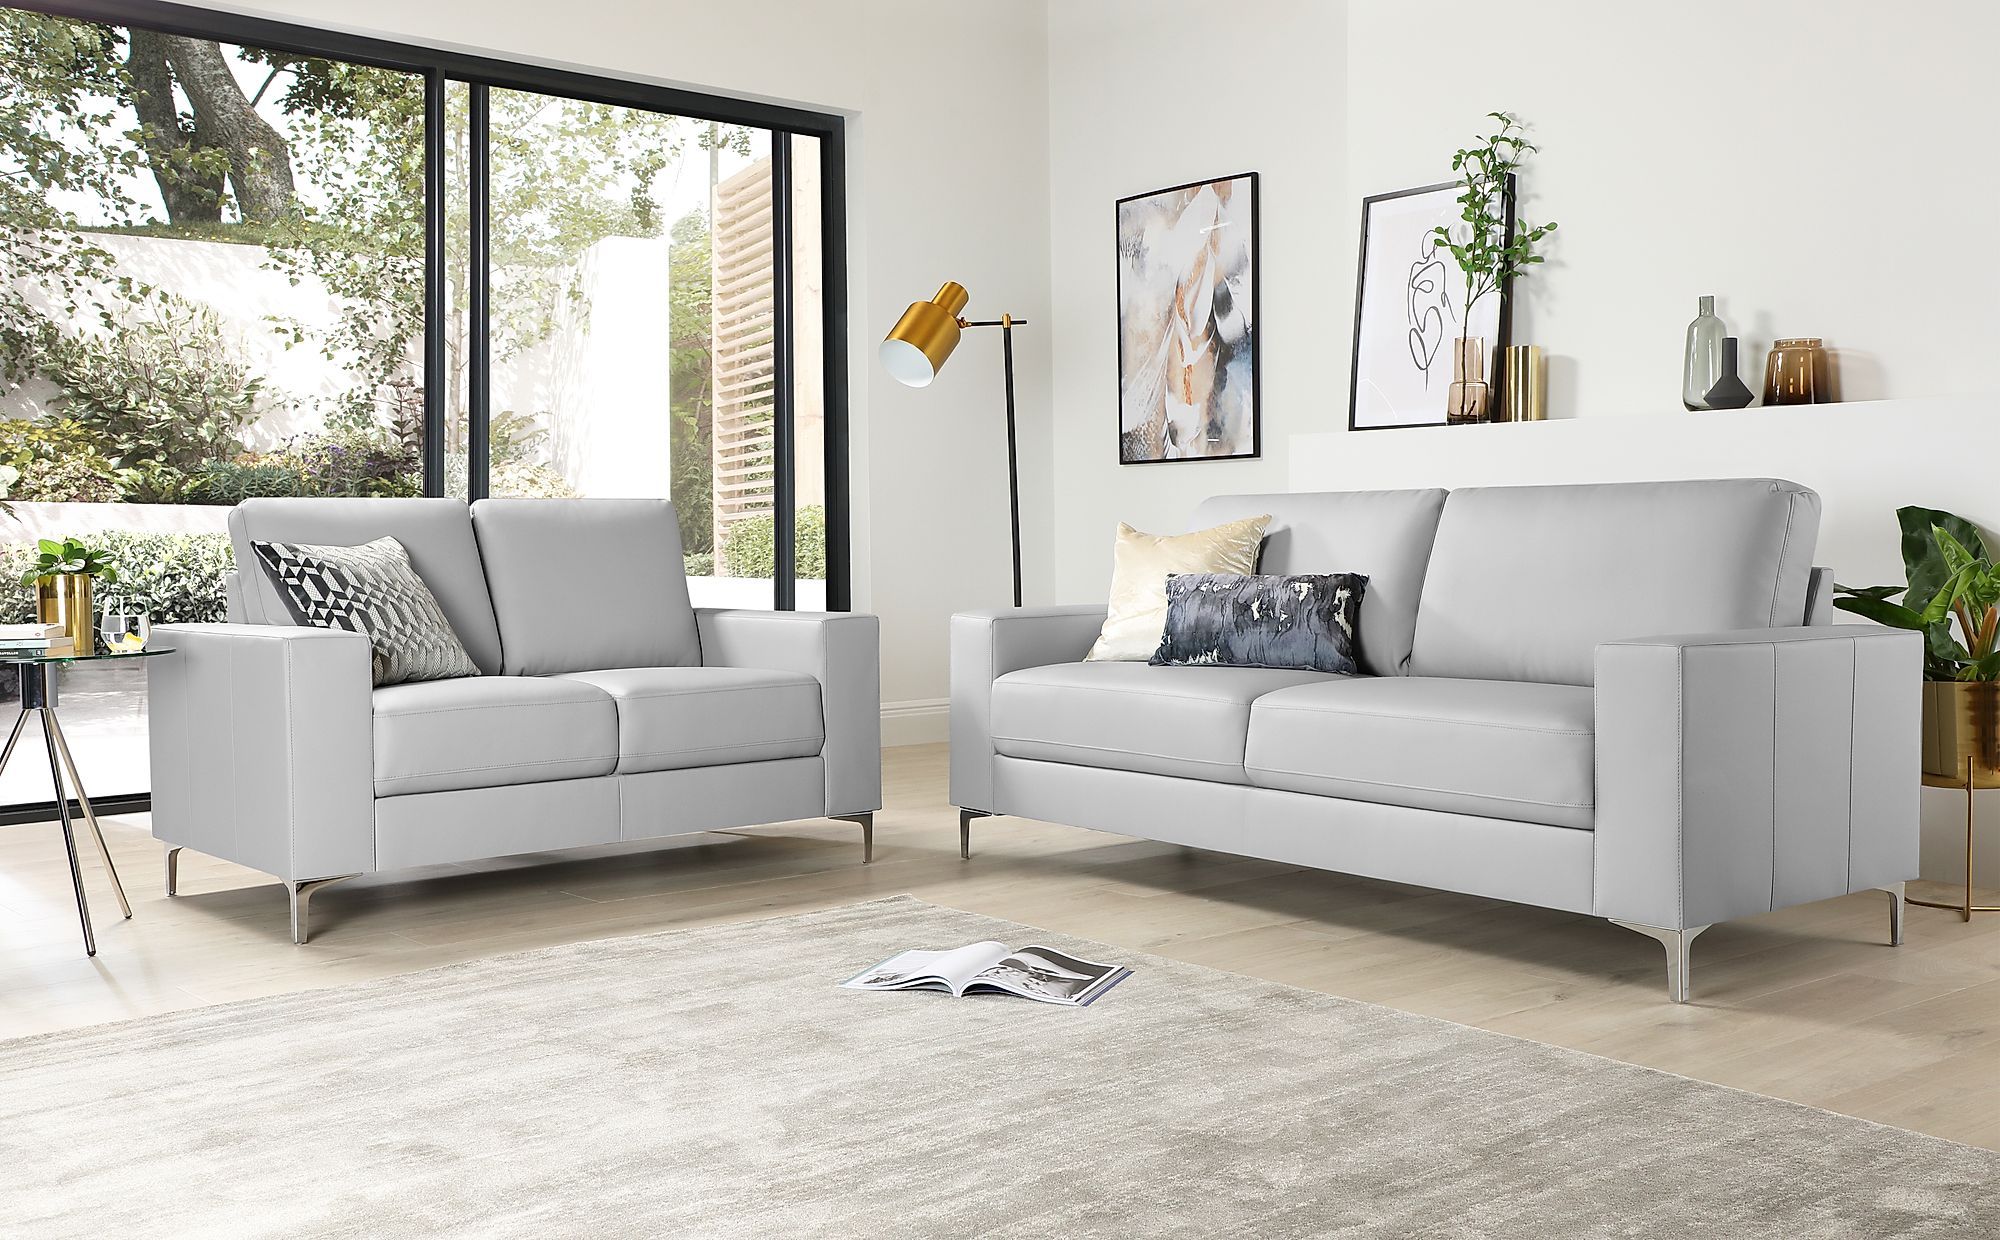 Baltimore Light Grey Leather 3+2 Seater Sofa Set | Furniture Choice Within Sofas In Light Grey (Gallery 5 of 20)